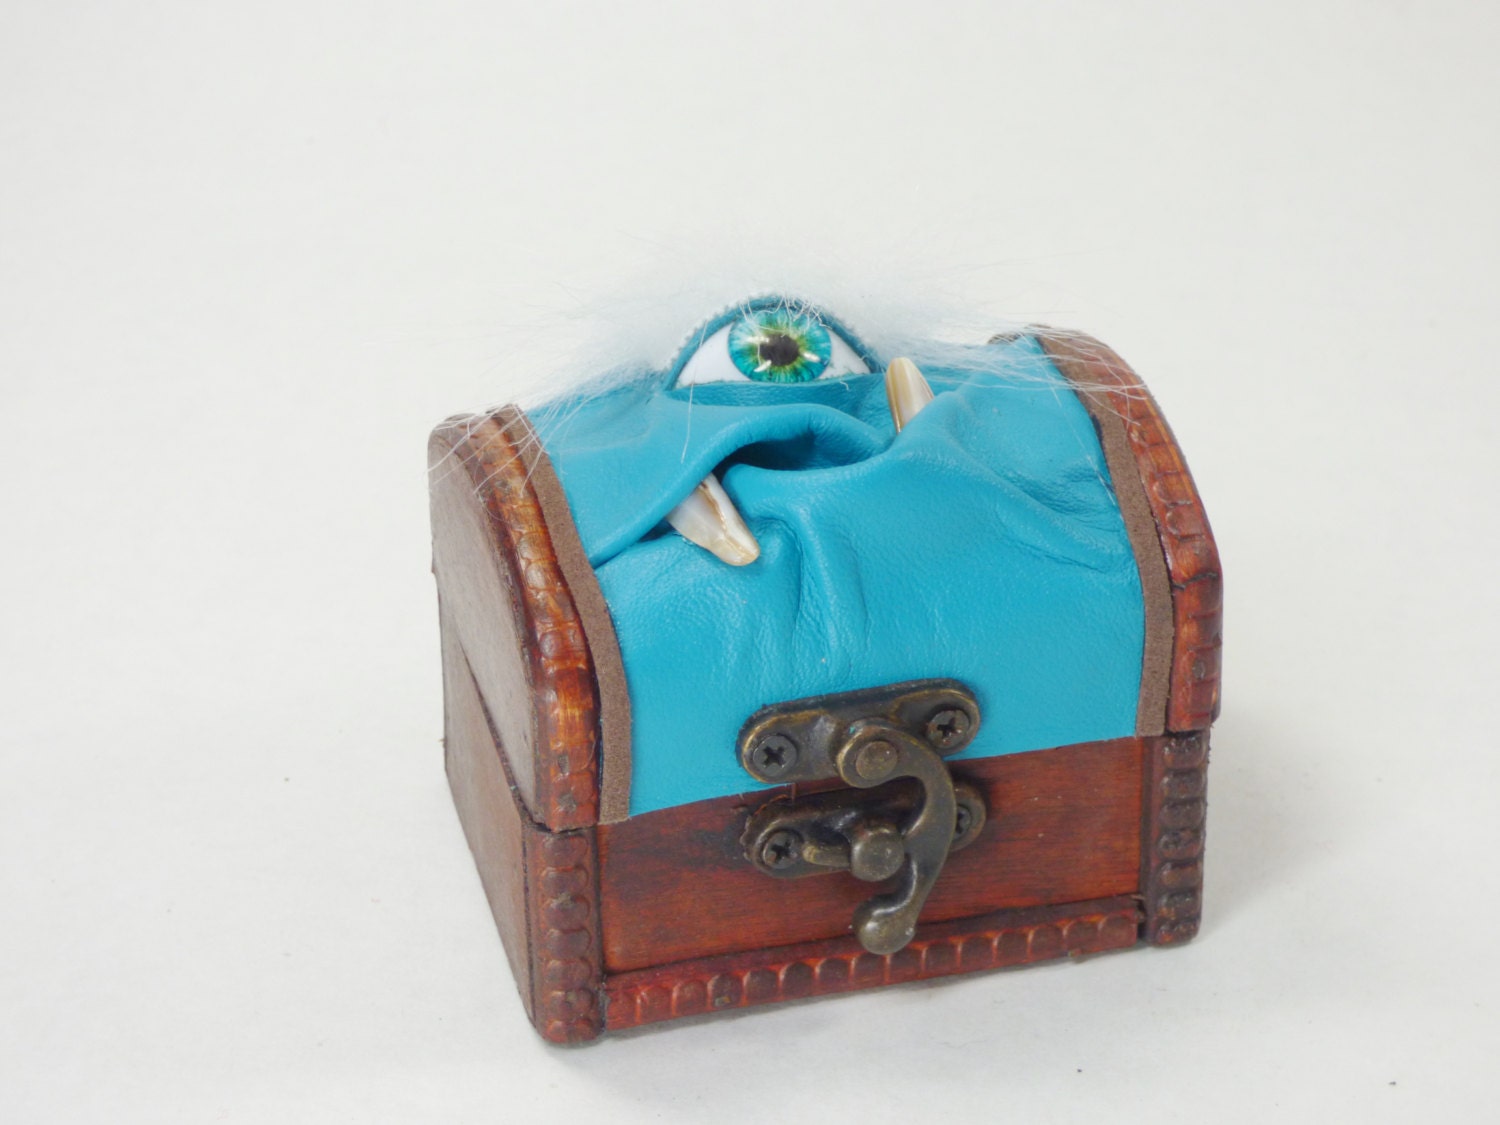 Stash Box Small Treasure Chest Trinket Teal Leather Monster